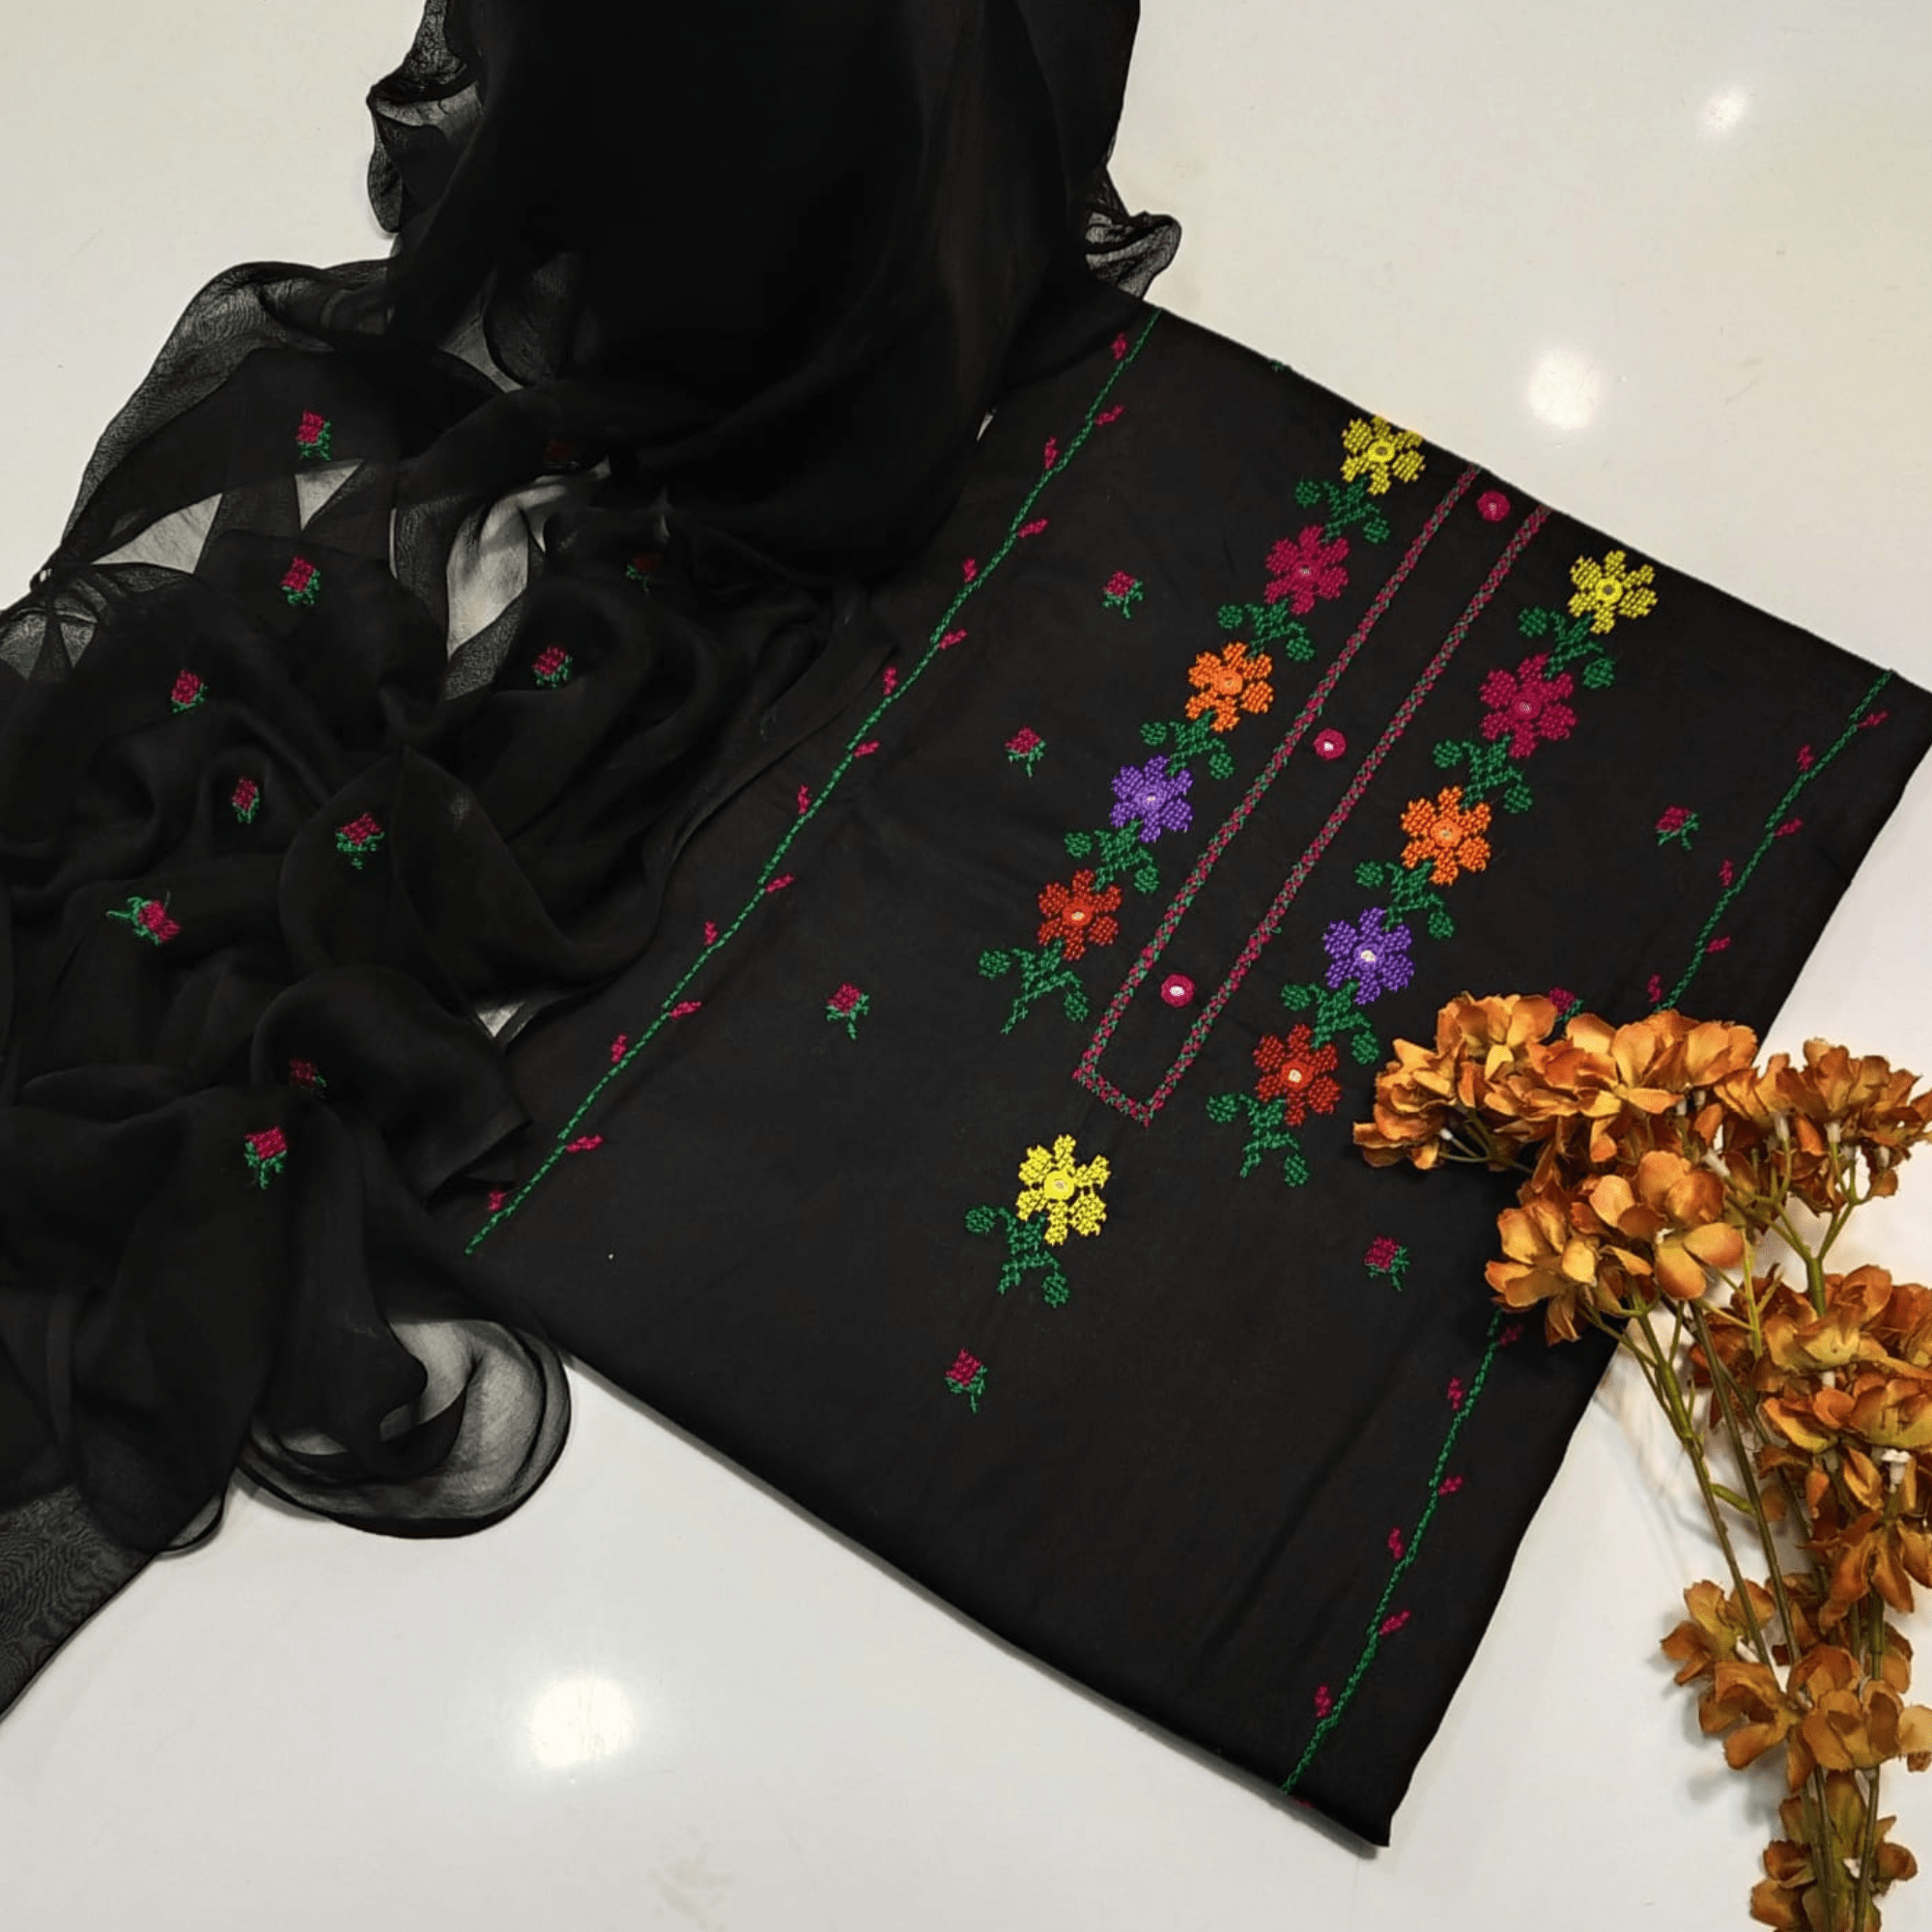 Black Color Embroidery Dresses Design For Women at Meea and Beea Apparels